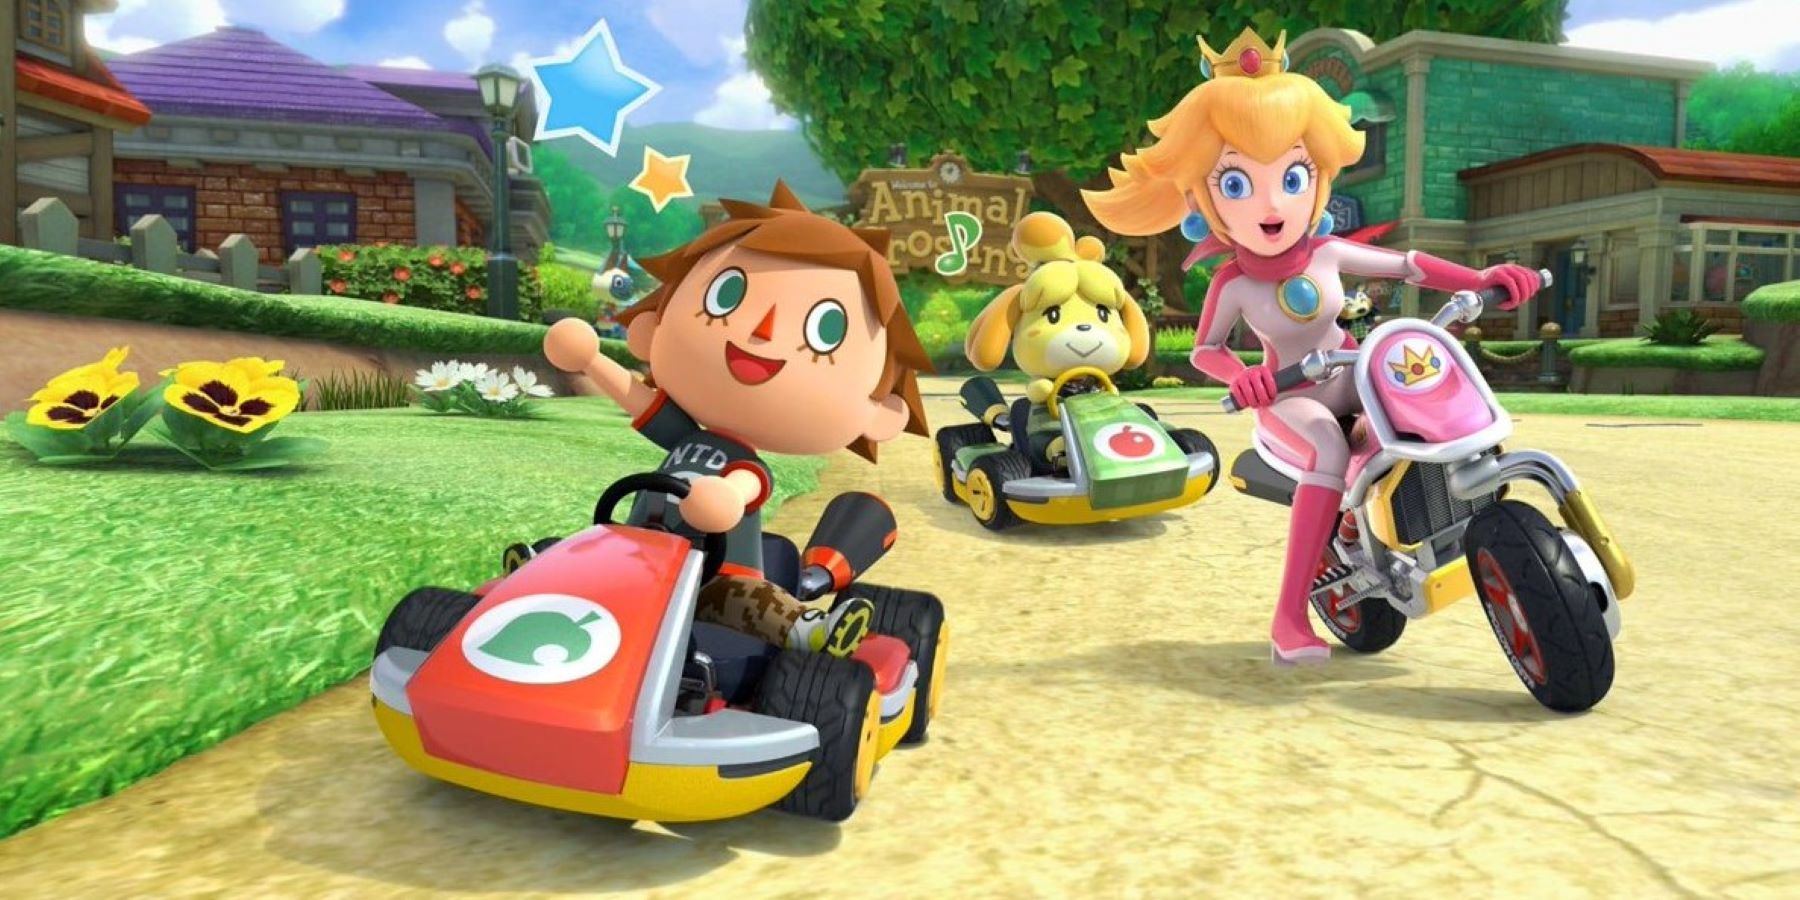 Peach, Isabelle, and a Villager racing on Mario Kart 8 Deluxe's Animal Crossing track